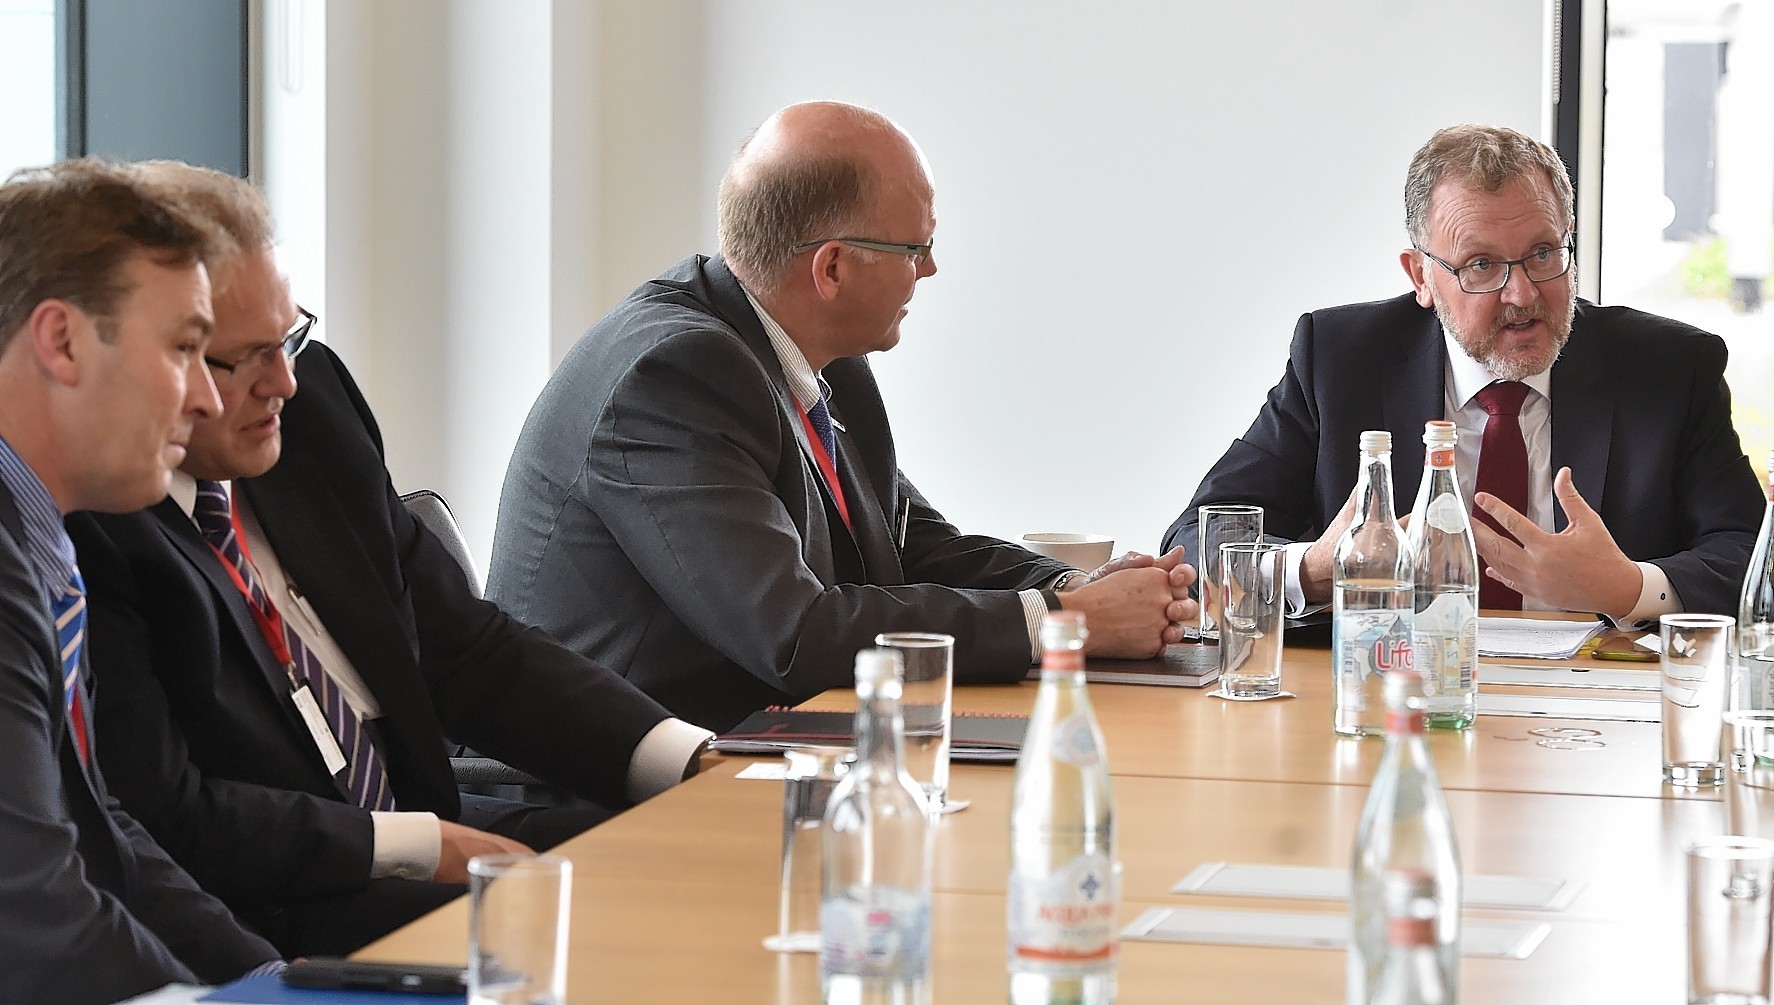 Secretary of State for Scotland David Mundell visited Aker Solutions at Aberdeen International Business Park to speak to oil and gas executives about Brexit.